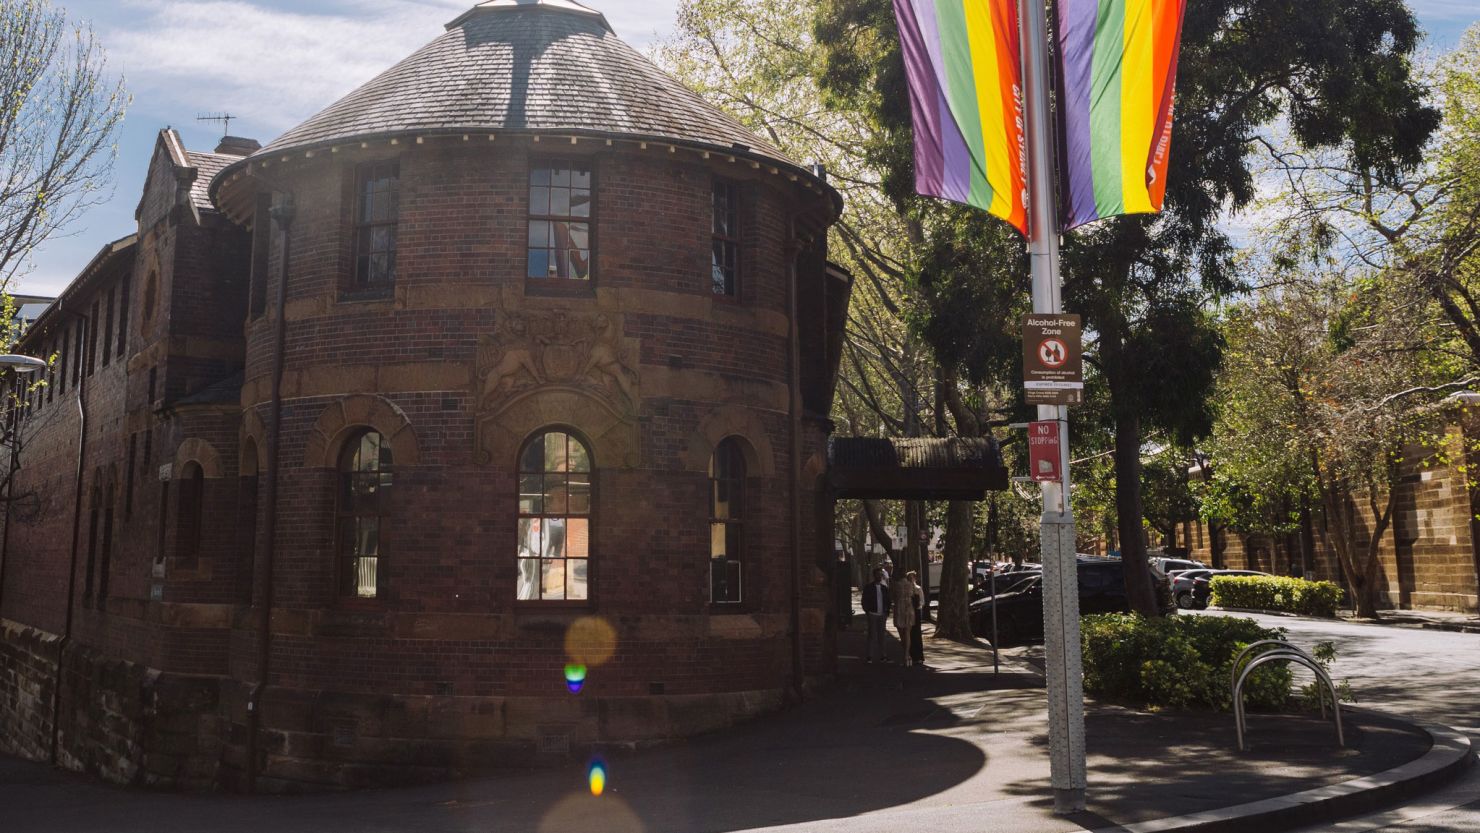 Sydney's former Darlinghurst Police Station will be the new permanent home of Queer history and cultural center, Qtopia.